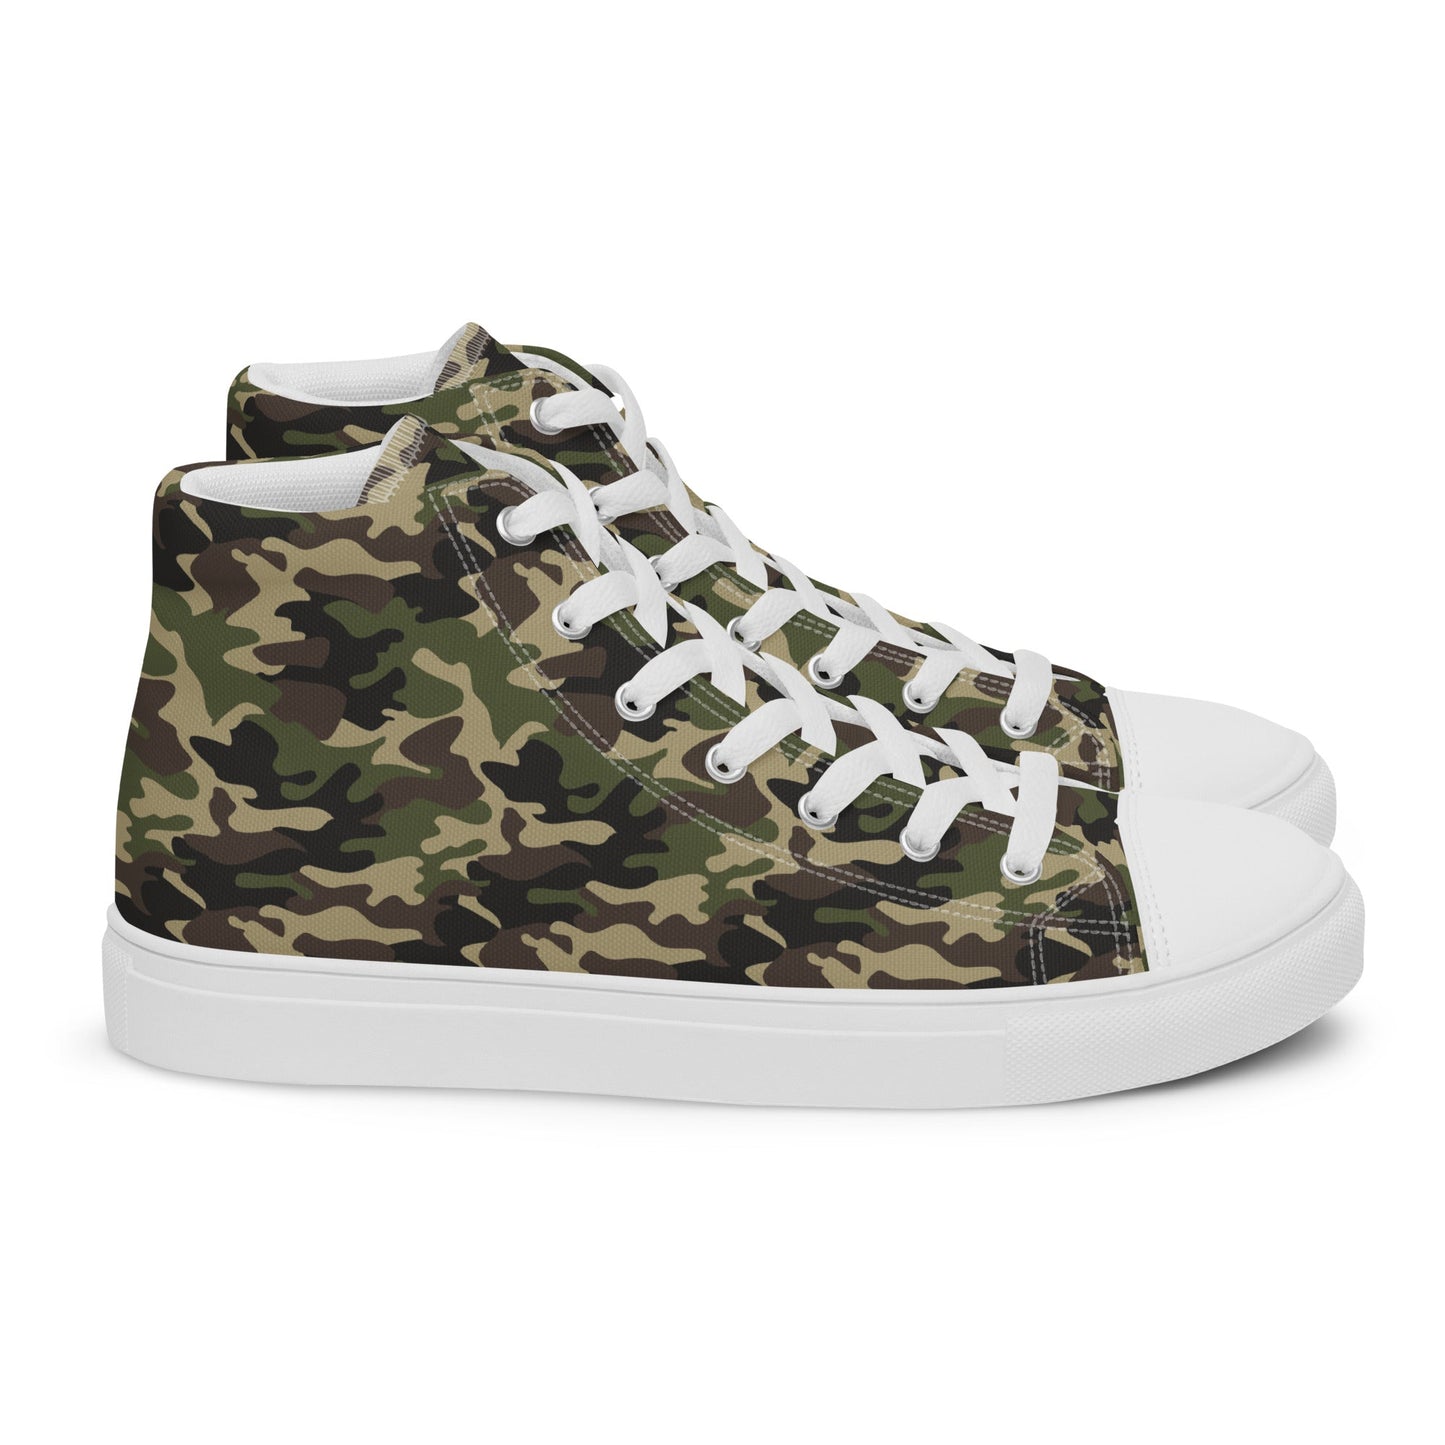 Men’s Camouflage Sneakers - DoggyLoveandMore